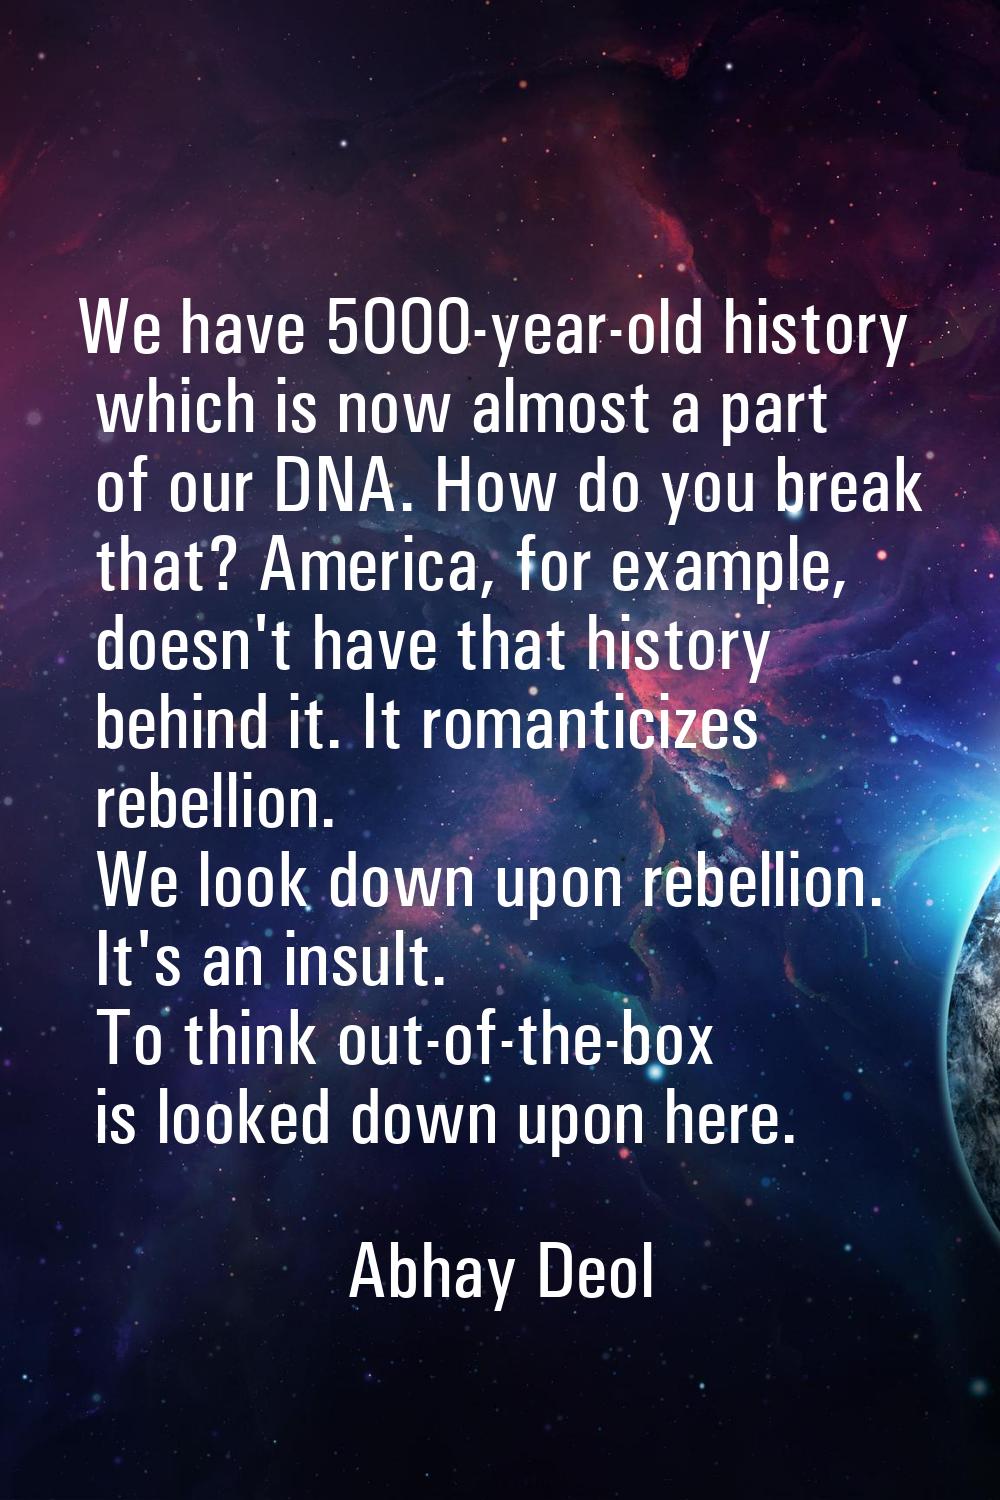 We have 5000-year-old history which is now almost a part of our DNA. How do you break that? America